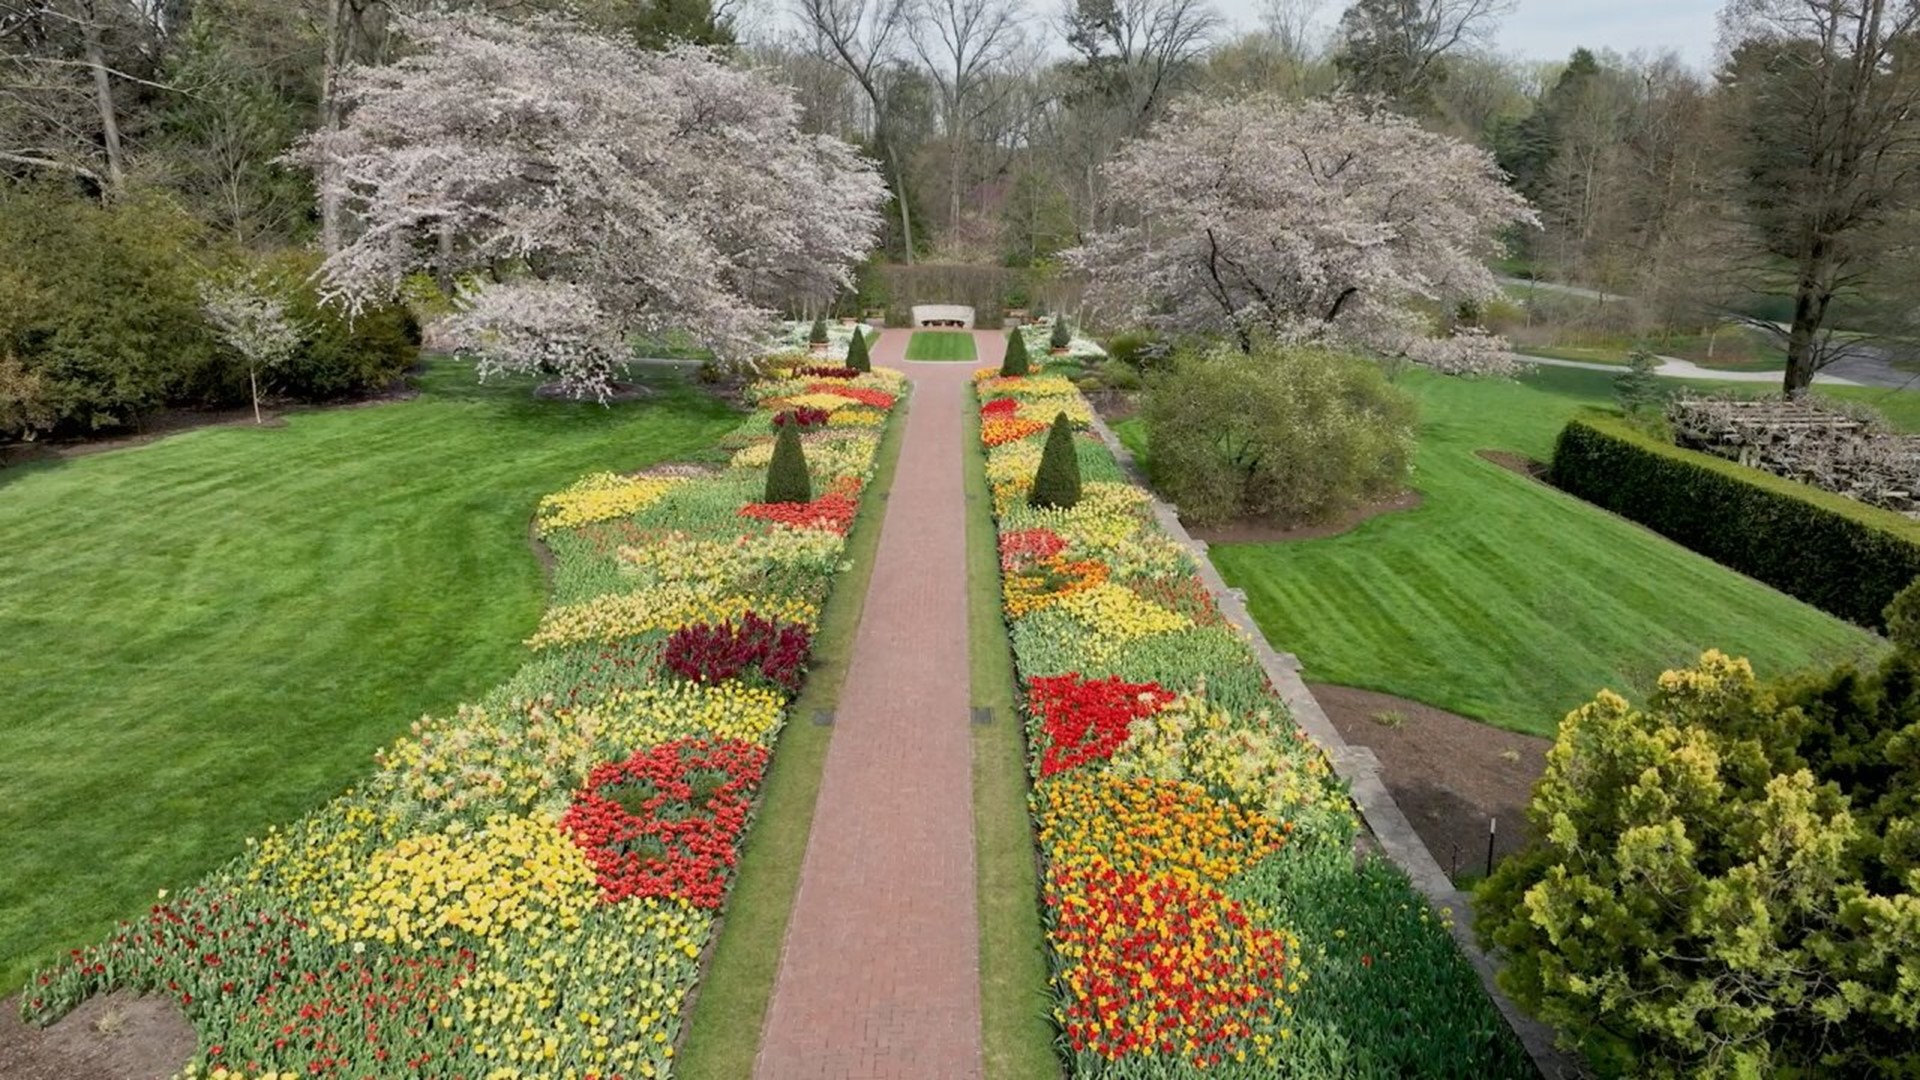 Spring bloom season runs from March 30 to April 29 at Longwood Gardens, showcasing hundreds of thousands of beautiful and vibrant plants and flowers.